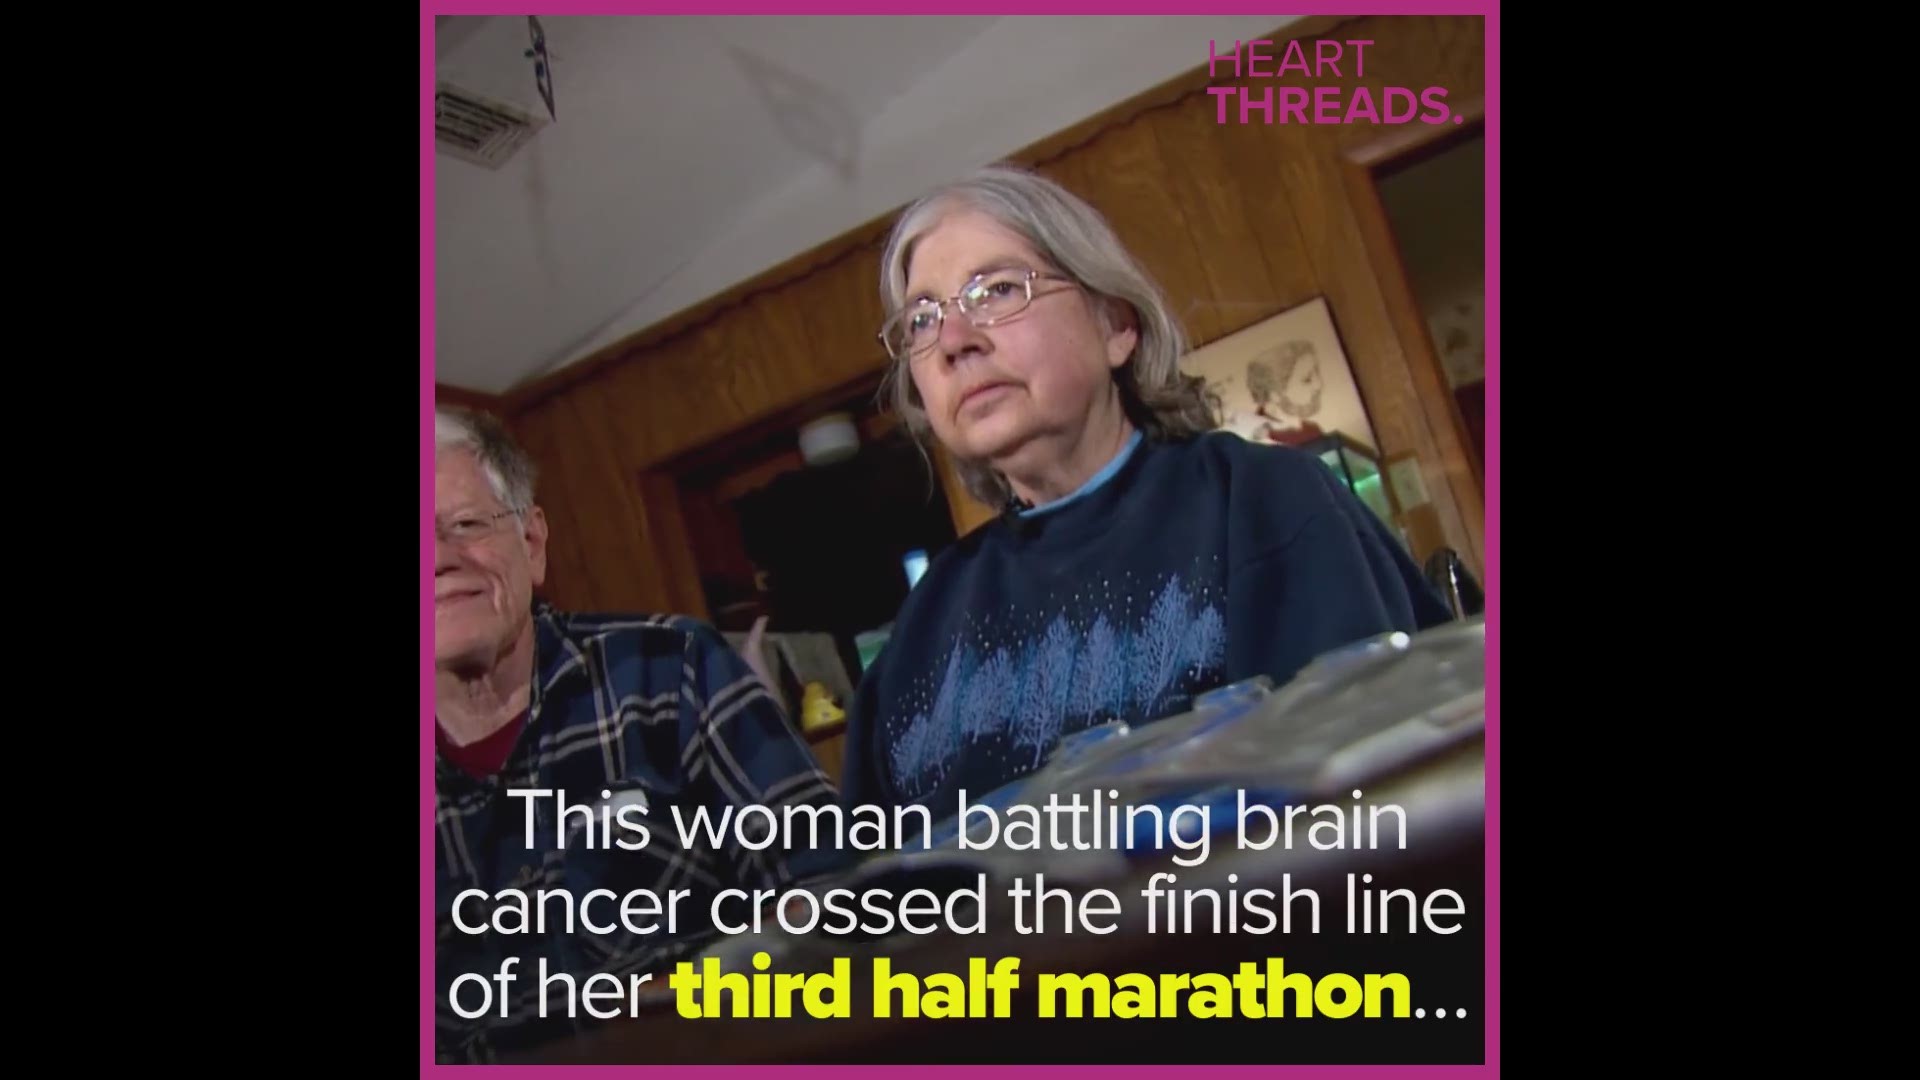 When it looked as though complications from brain cancer would stop Suzanne Stone from completing her third half marathon, her family ran the race for her so that she could cross the finish line.